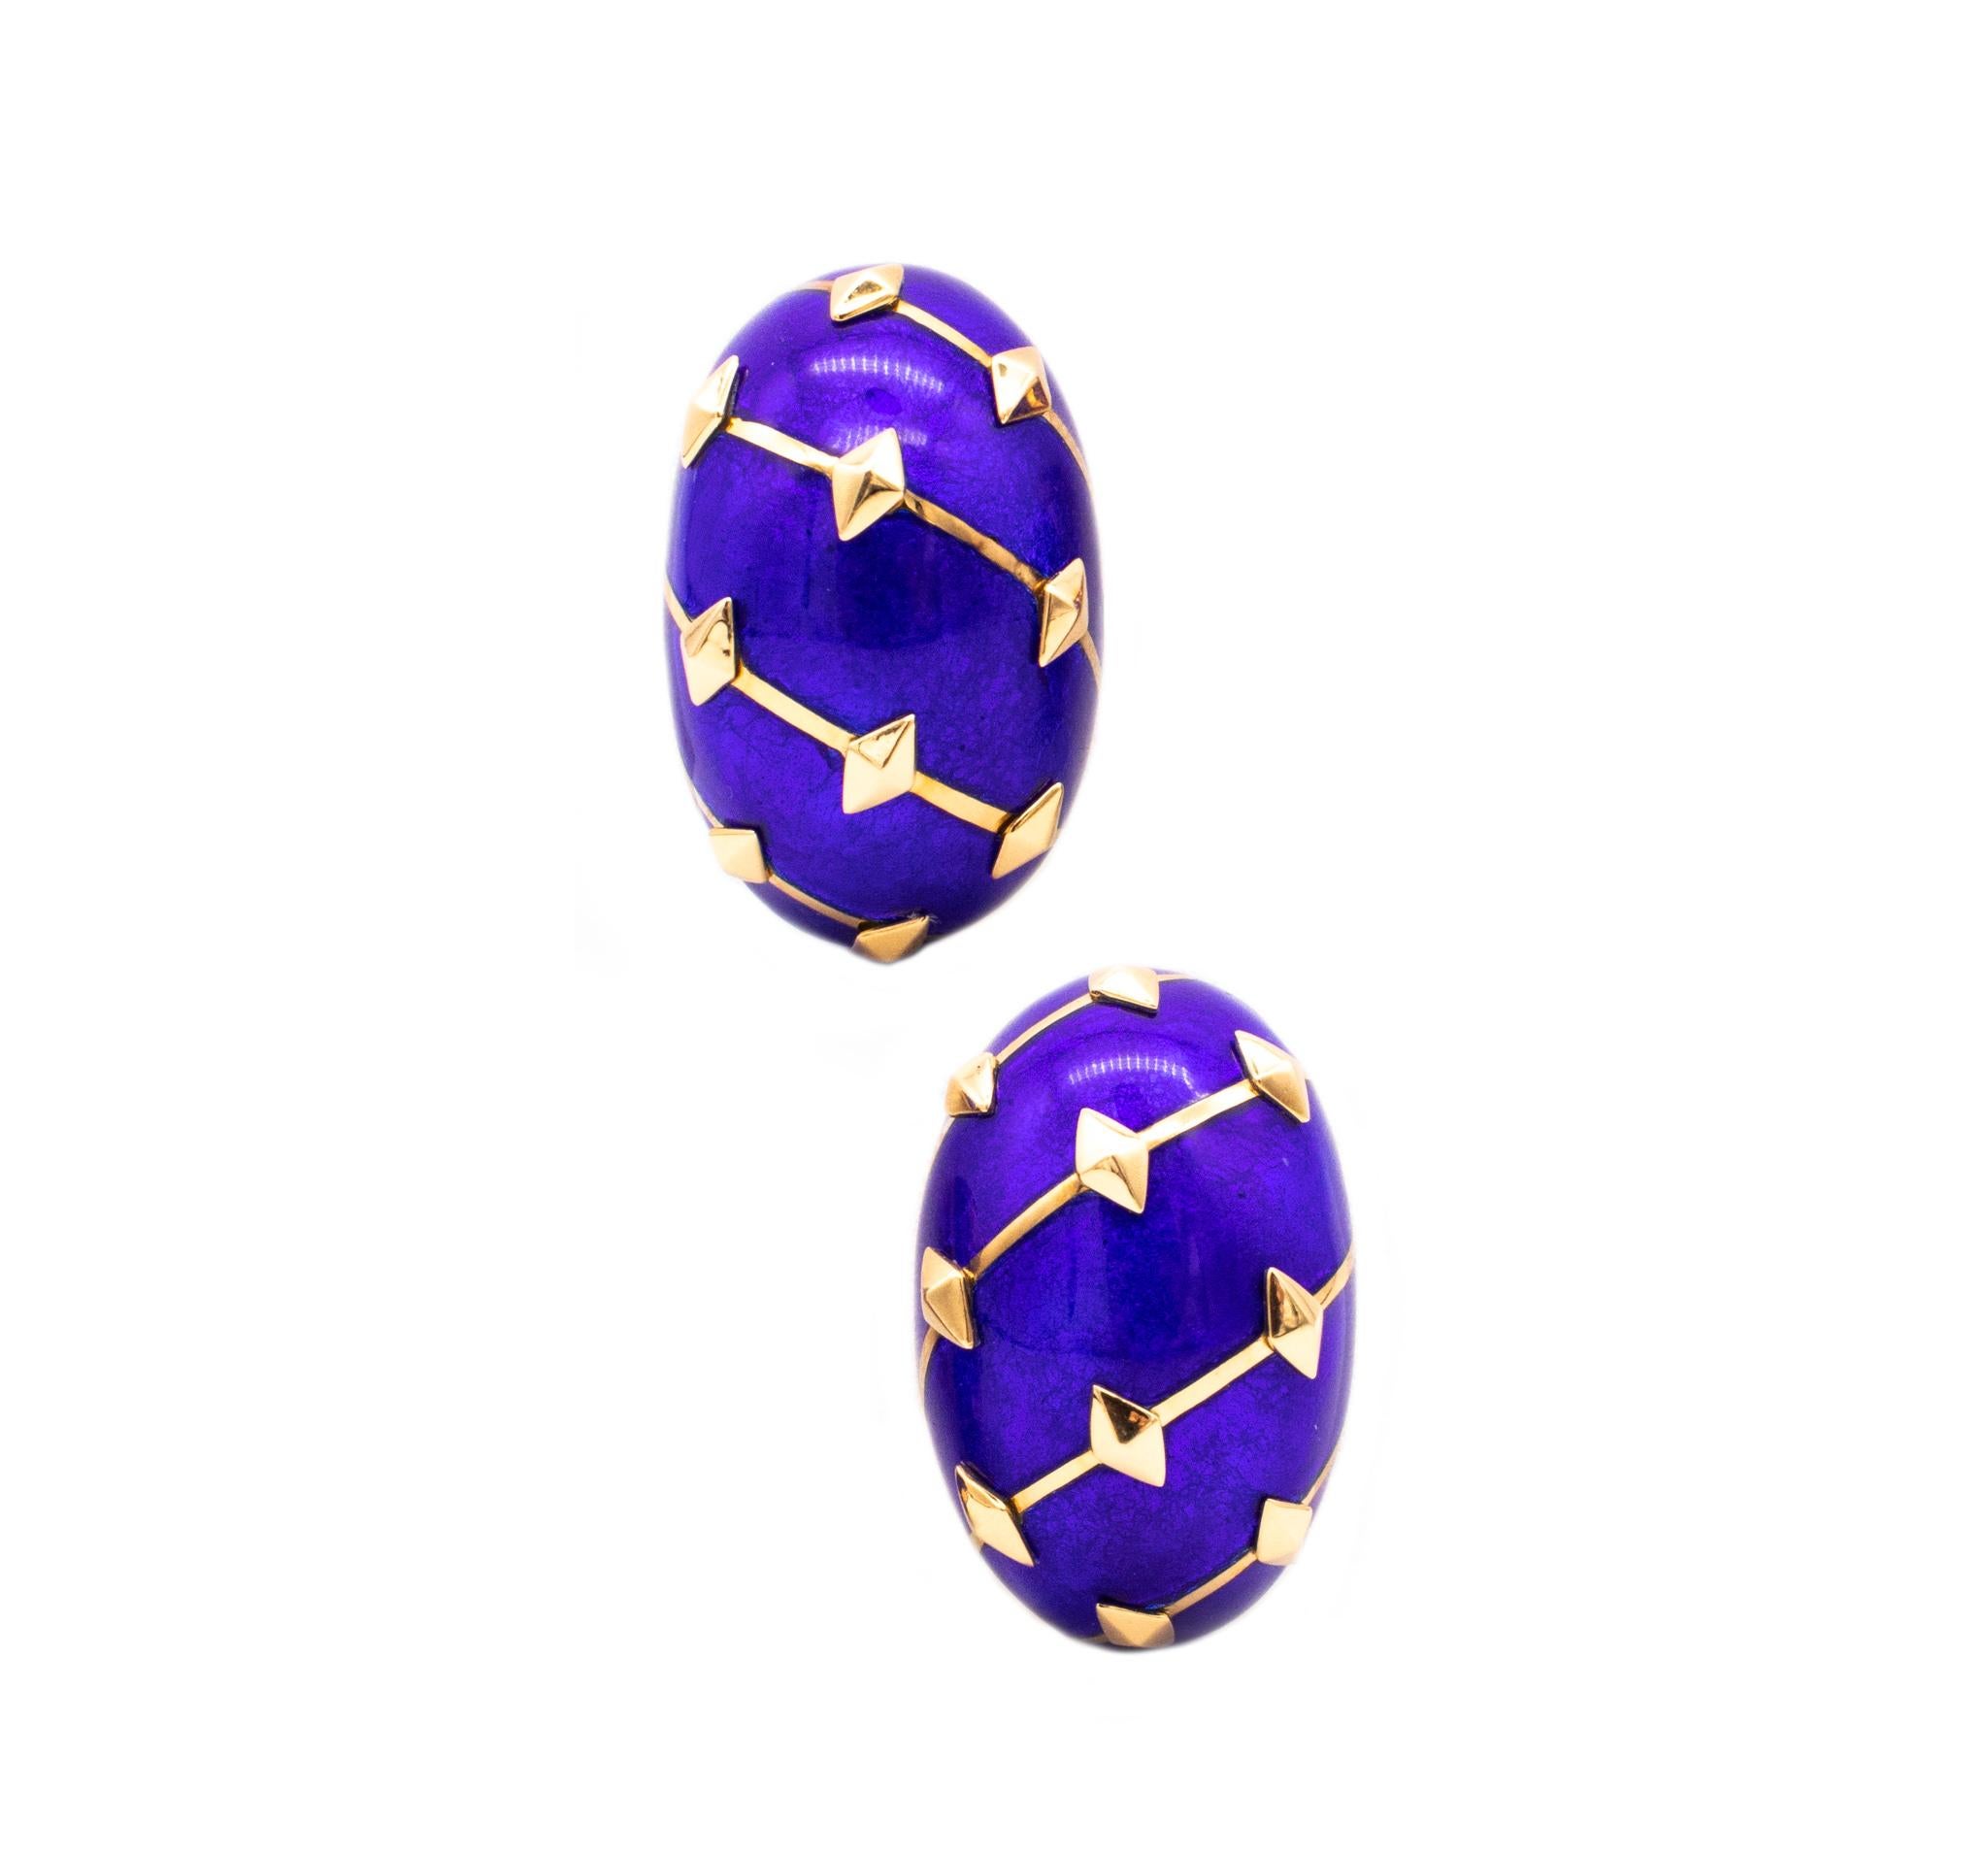 Rare earrings designed by Jean Schlumberger for tiffany & co.

This pair has been created at the prestigious Jean Schlumberger studios in Paris, France. They are part of the Schlumberger collection called lozenge, in reference to the triangles in